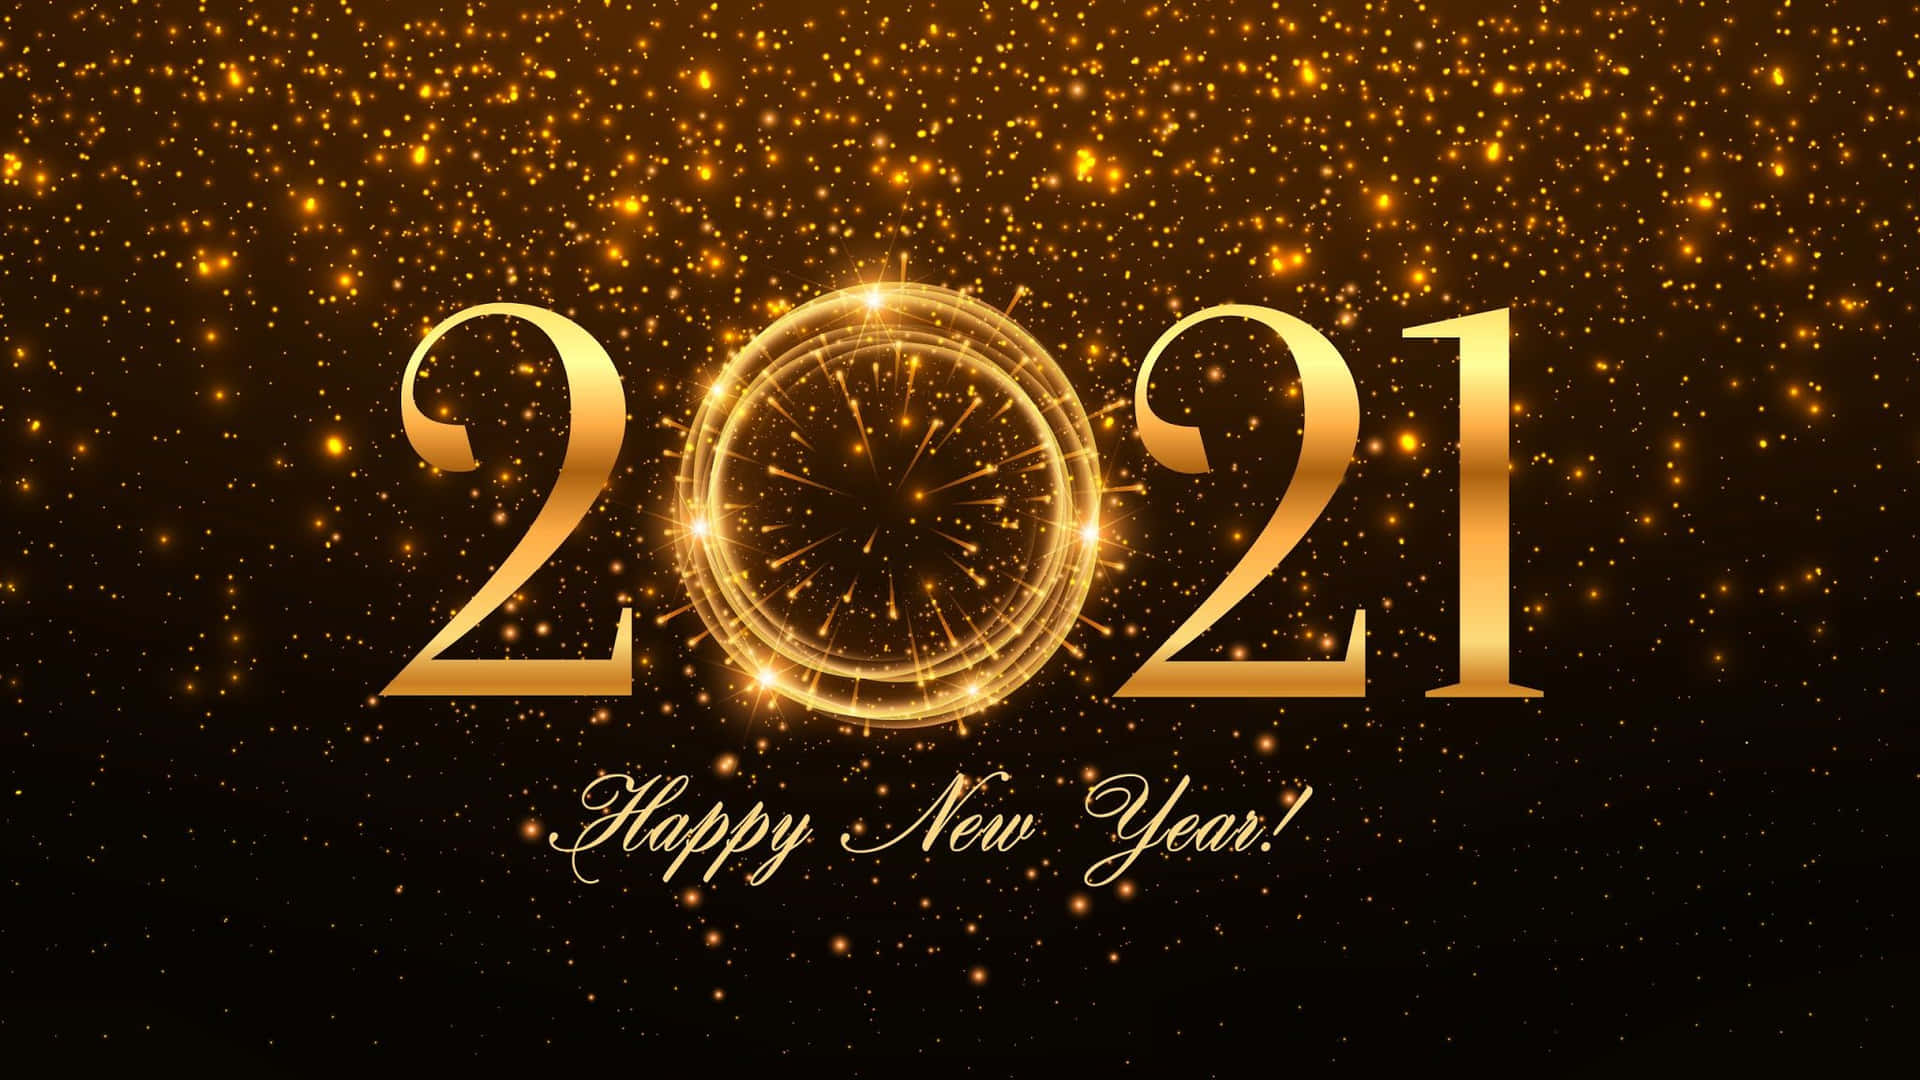 2021 Happy New Year Pictures Wallpaper